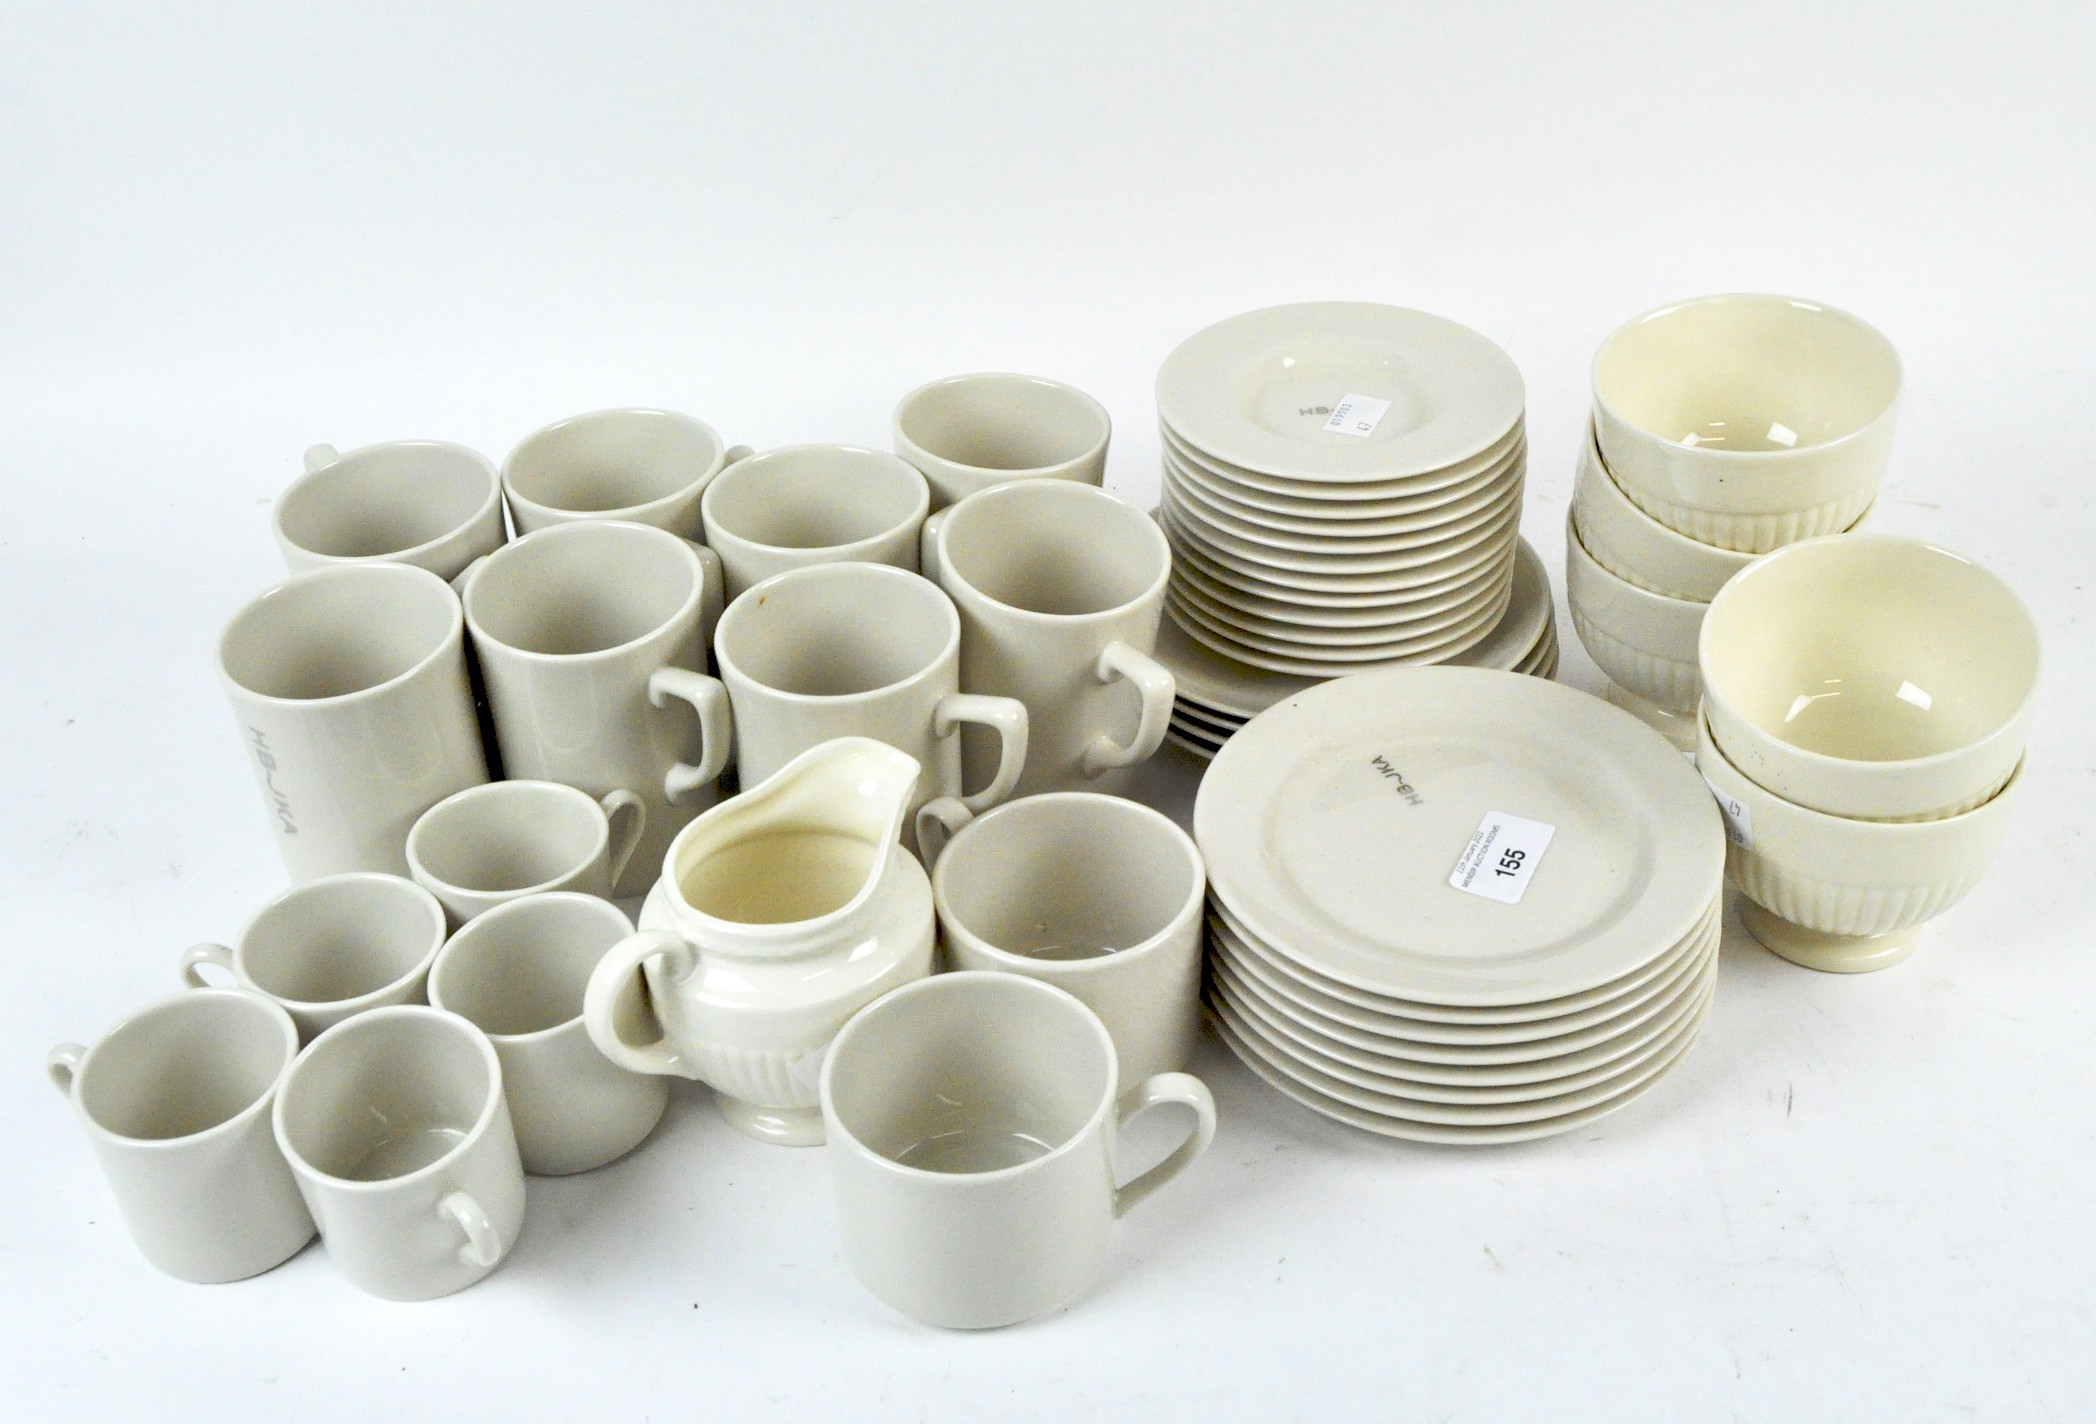 A part tea set by Pickard and some Wedgwood tea items, both with a cream glaze,